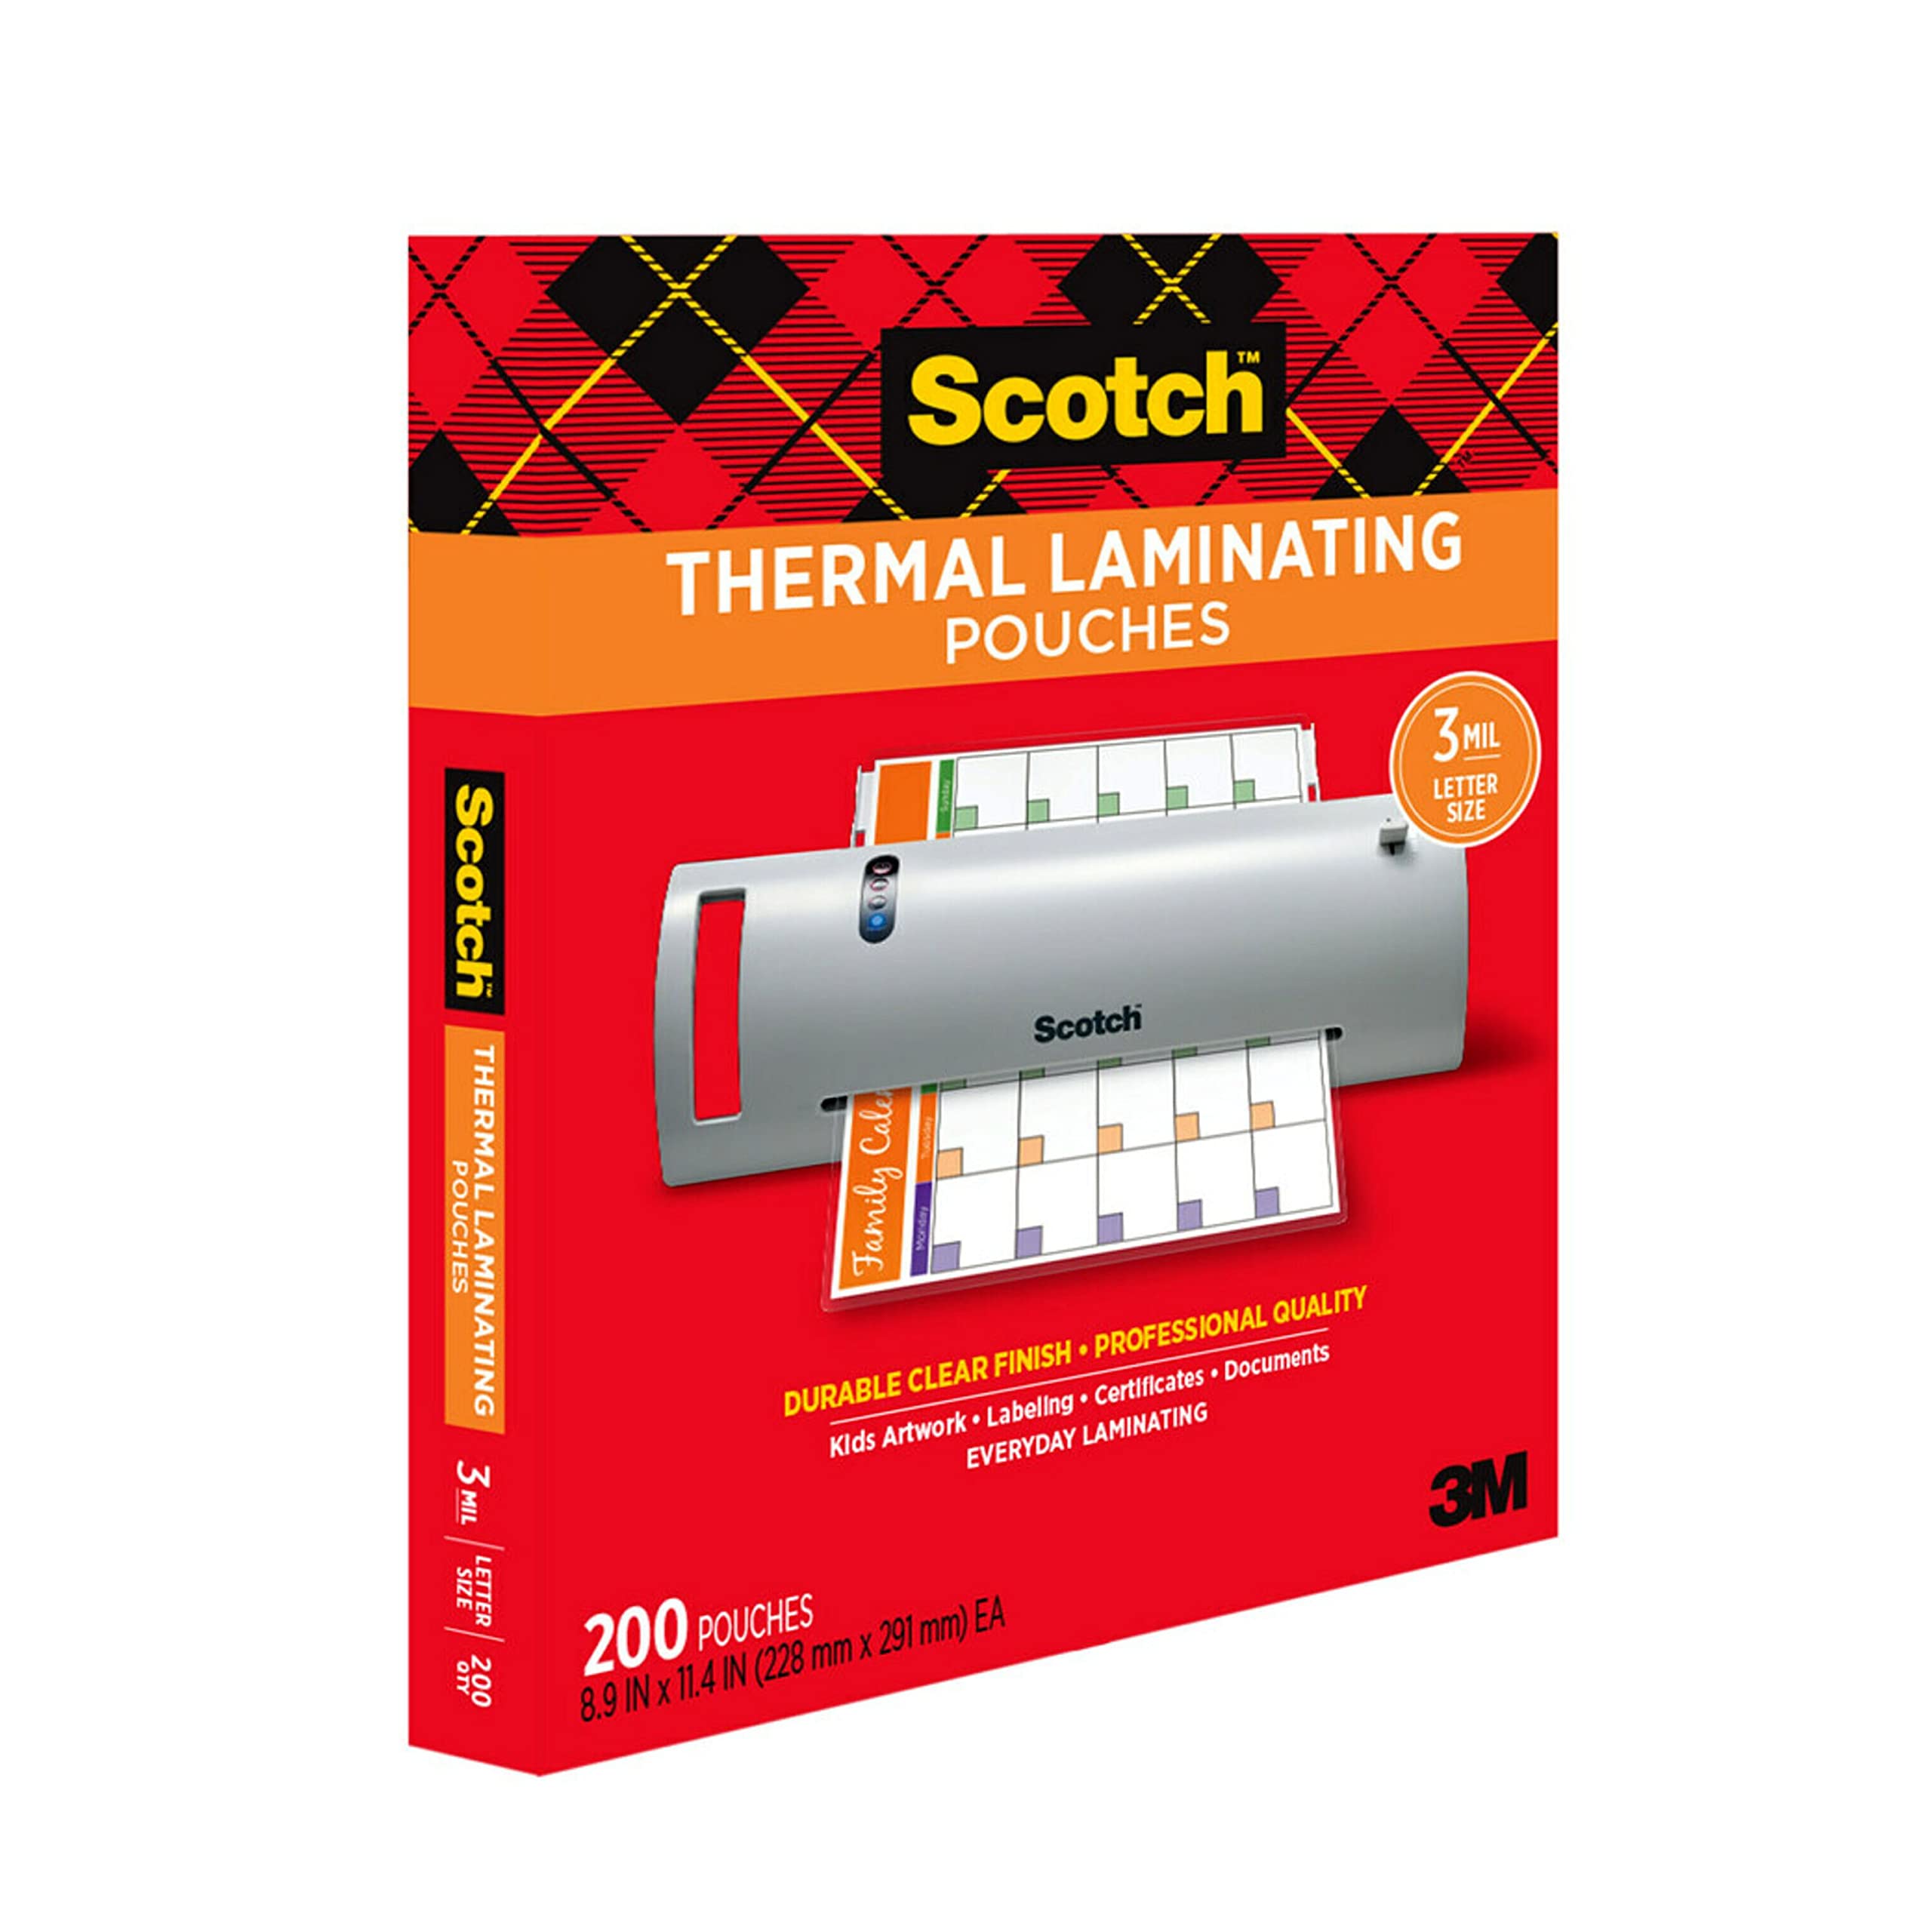 Scotch Thermal Laminating Pouches, 200 Pack Laminating Sheets, 3 Mil, 8.9 x 11.4 Inches, Education Supplies & Craft Supplies, For Use With Thermal Laminators, Letter Size Sheets (TP3854-200)